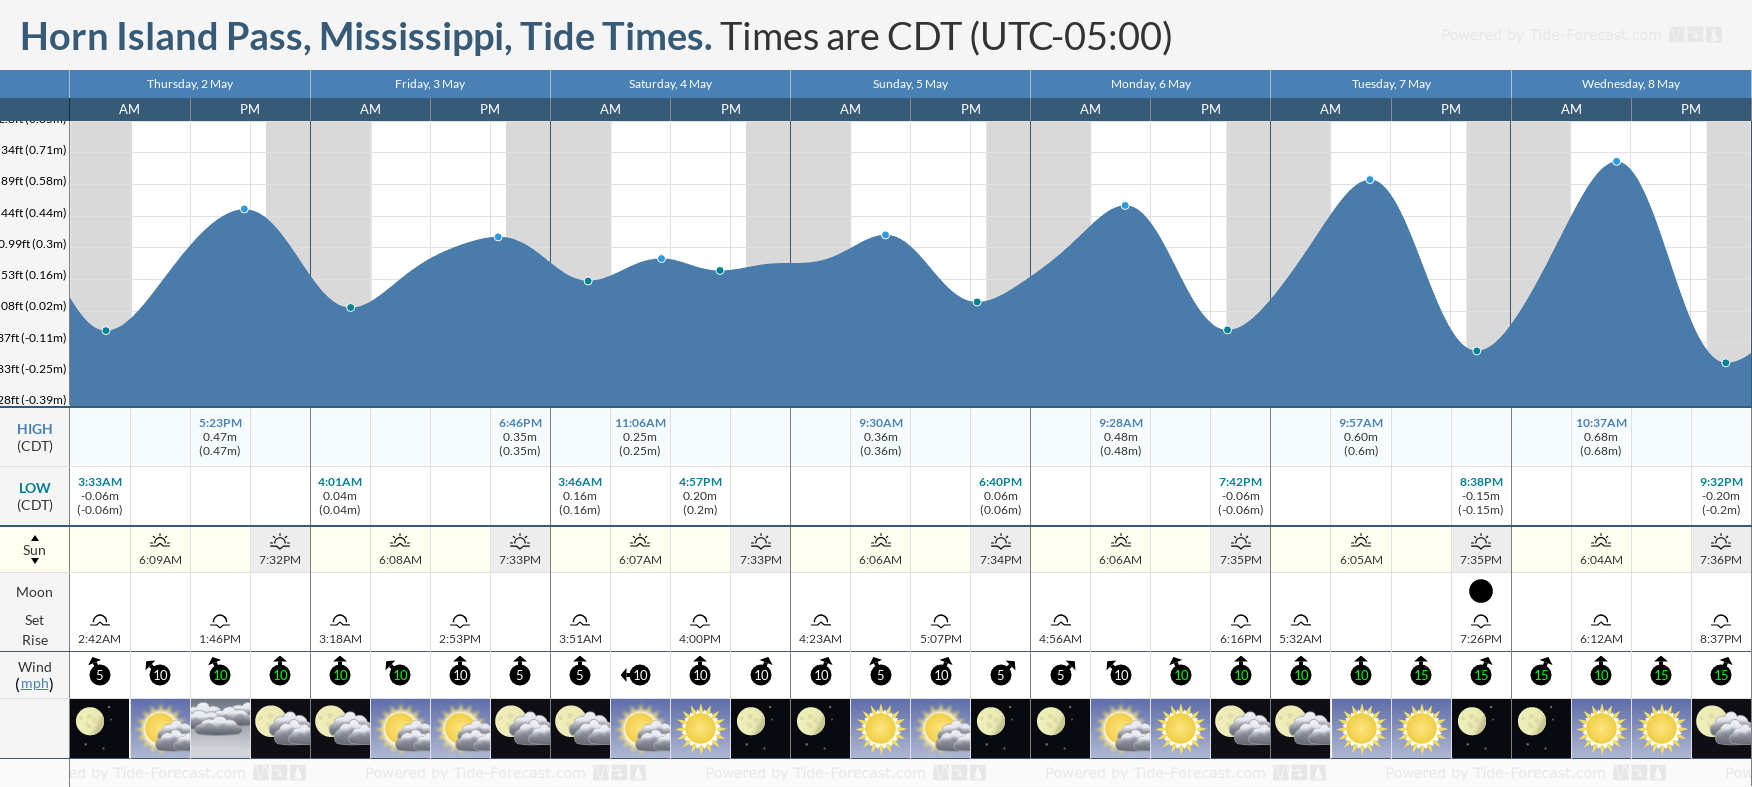 Horn Island Pass, Mississippi Tide Chart including high and low tide tide times for the next 7 days